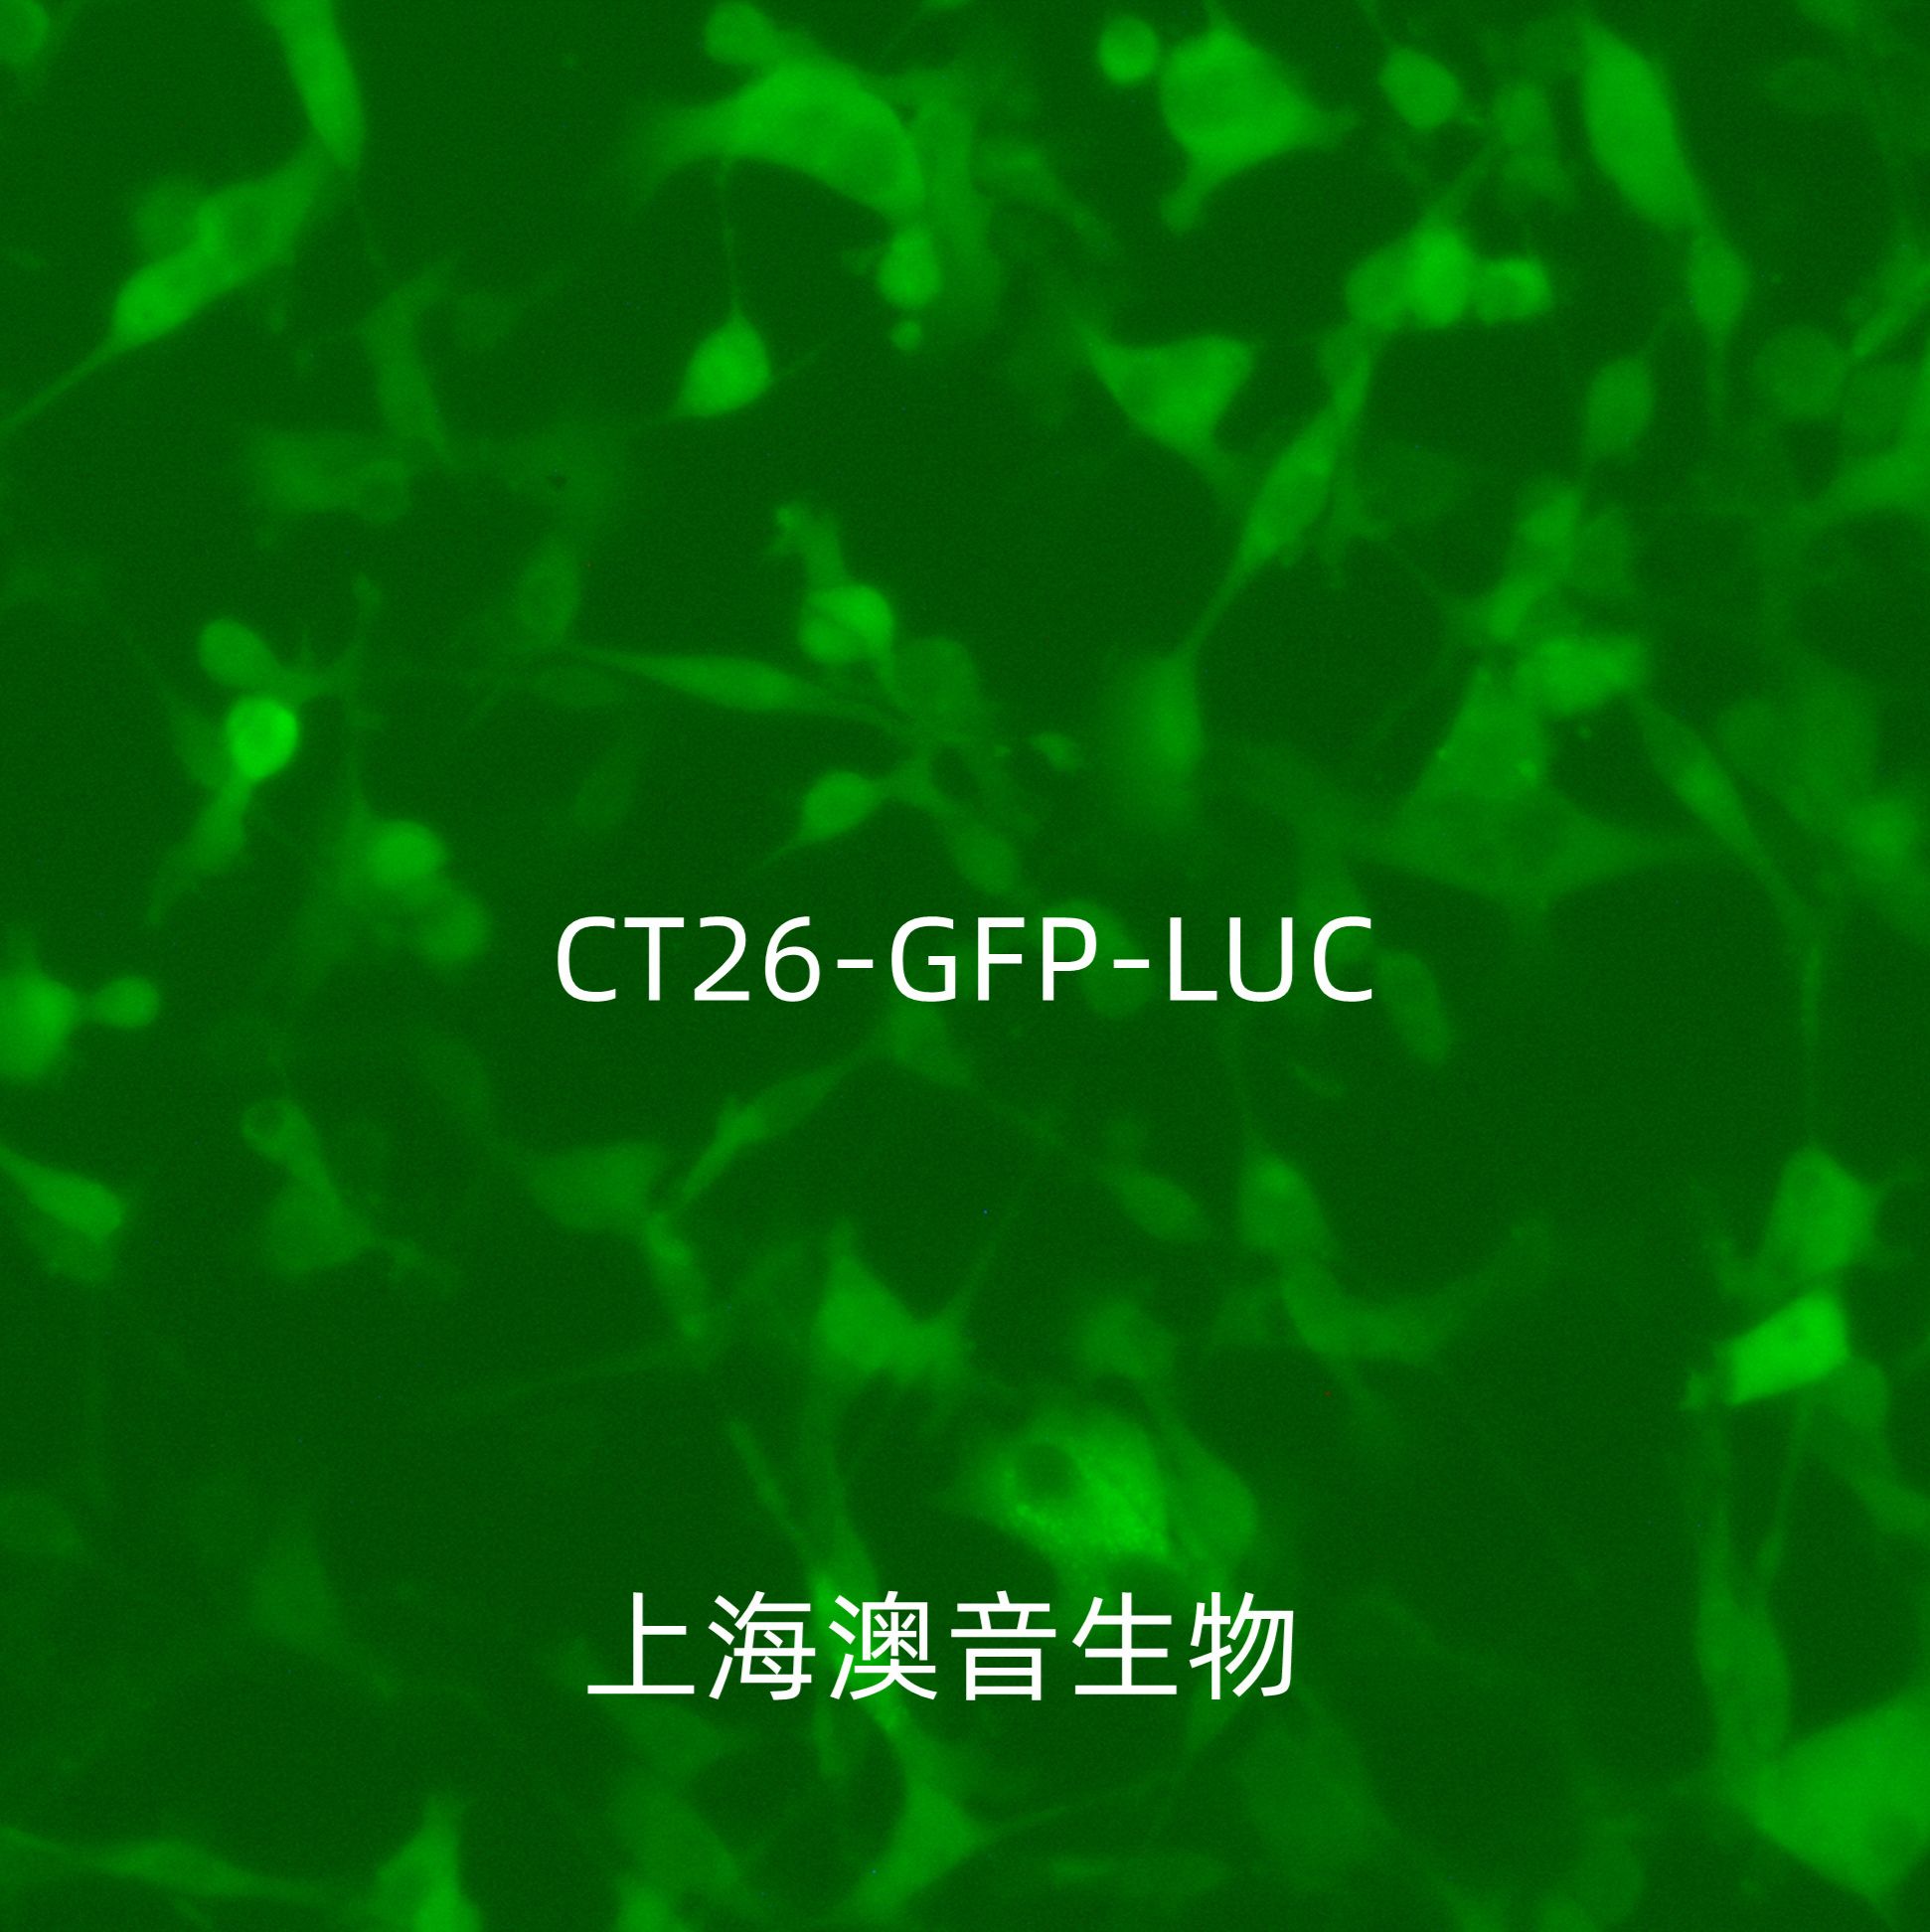 CT26.WT-LUC-GFP-Puro[CT26-GFP;CT26-LUC]双标记的小鼠结肠癌细胞